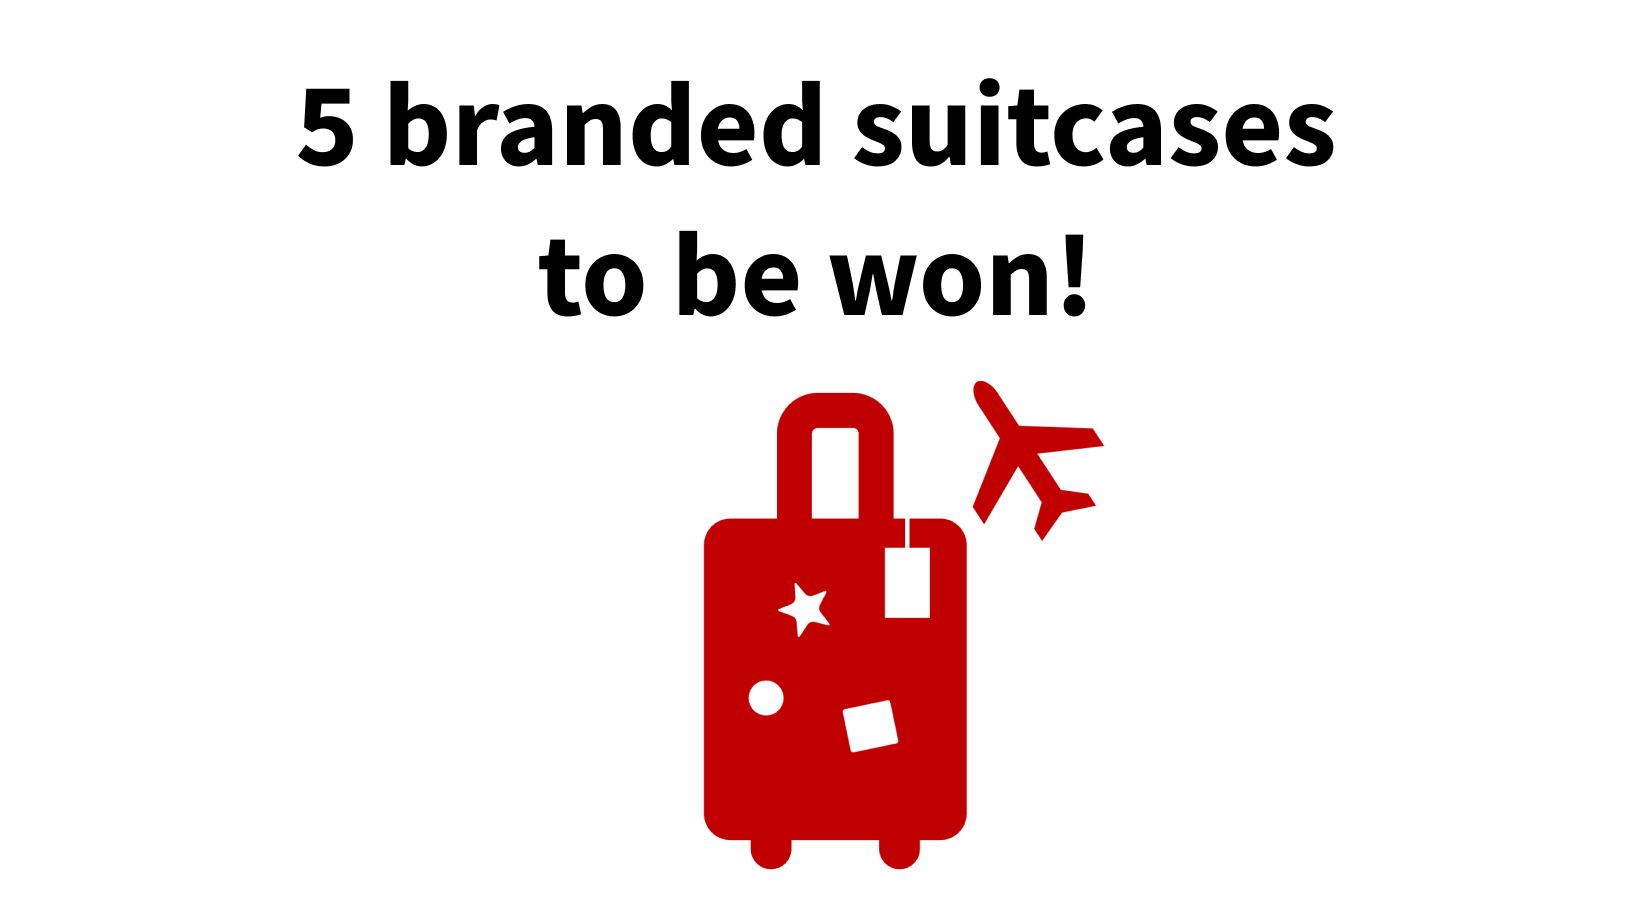 Stand to win a branded suitcase when you register & get ANY featured deals